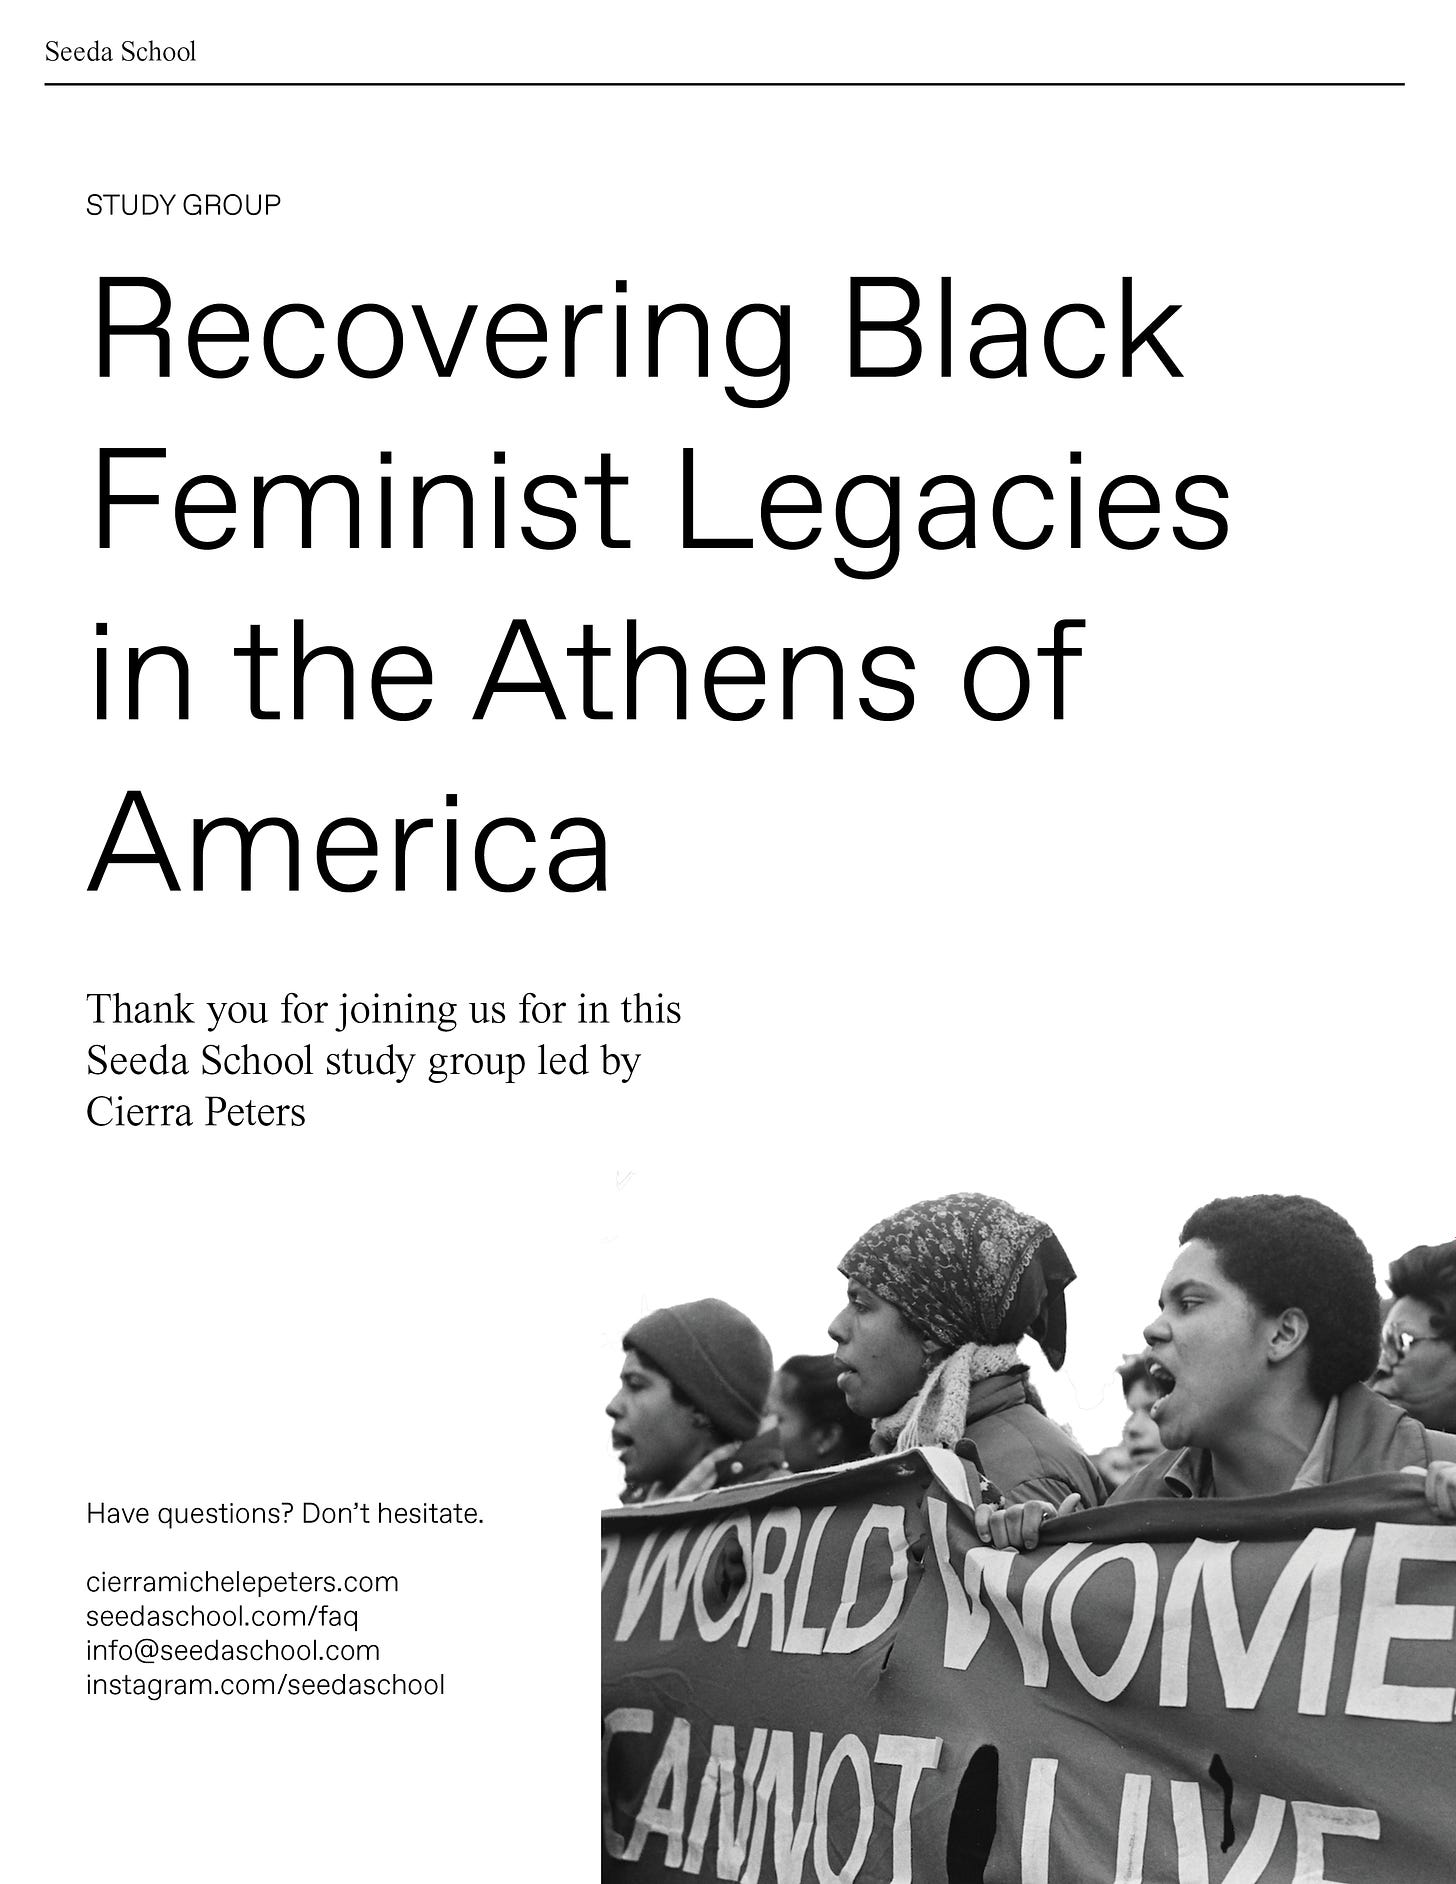 Cover of Seeda School worksheet featuring a photo of the Combahee River Collective protesting and the title of the study group "Recovering Black Feminist Legacies in the Athens of America"